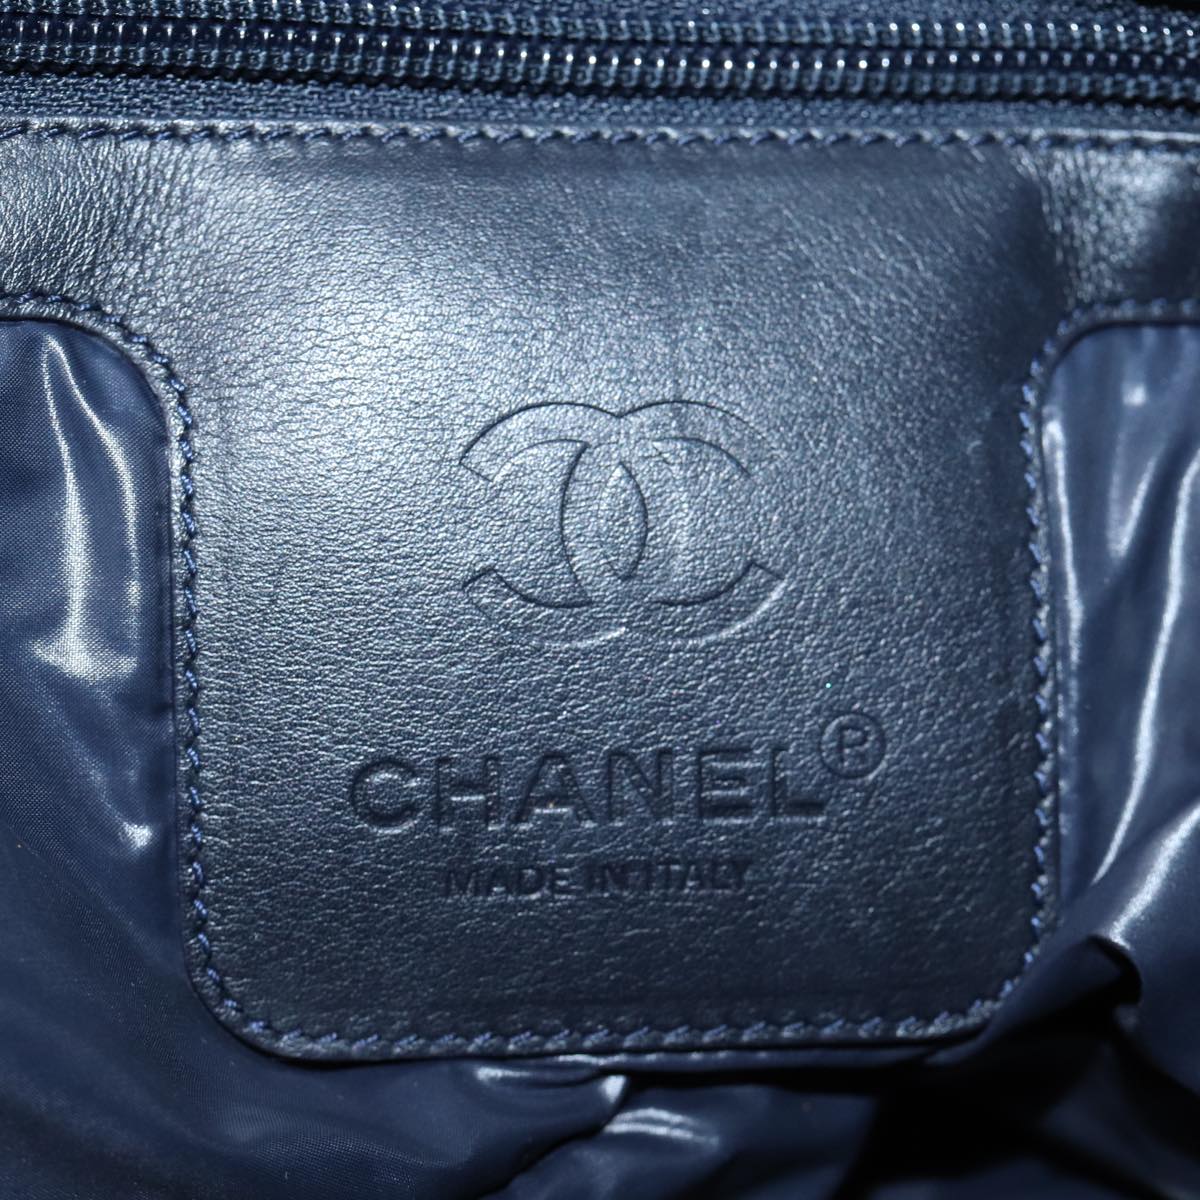 CHANEL Cococoon Hand Bag Patent leather Silver CC Auth bs13736